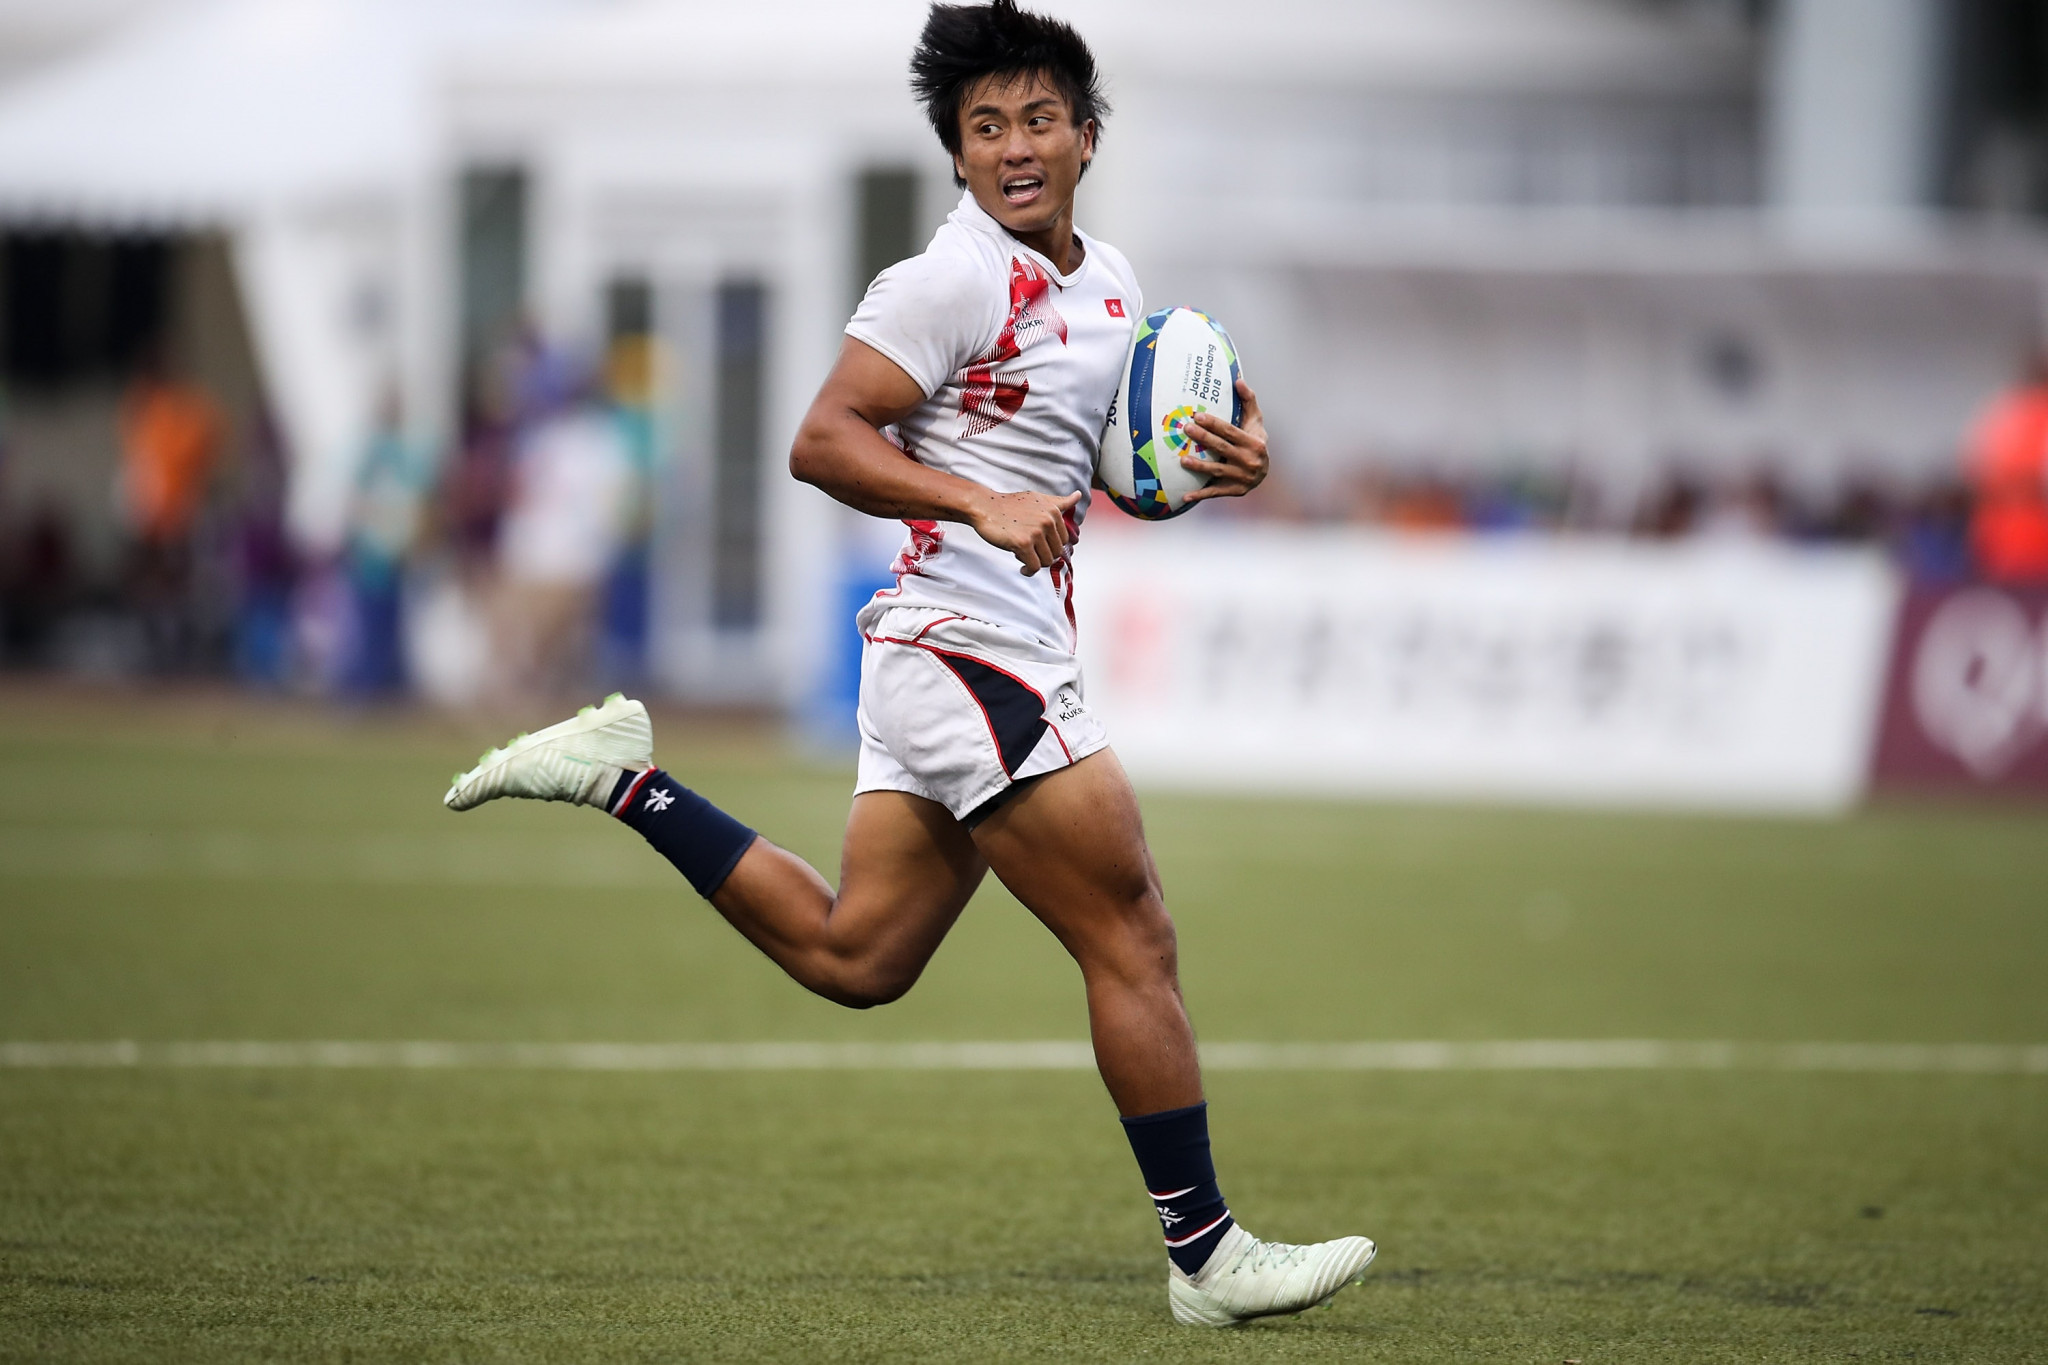 Hong Kong stormed to victory in the men's competition at the Asia Rugby Sevens Series ©Getty Images